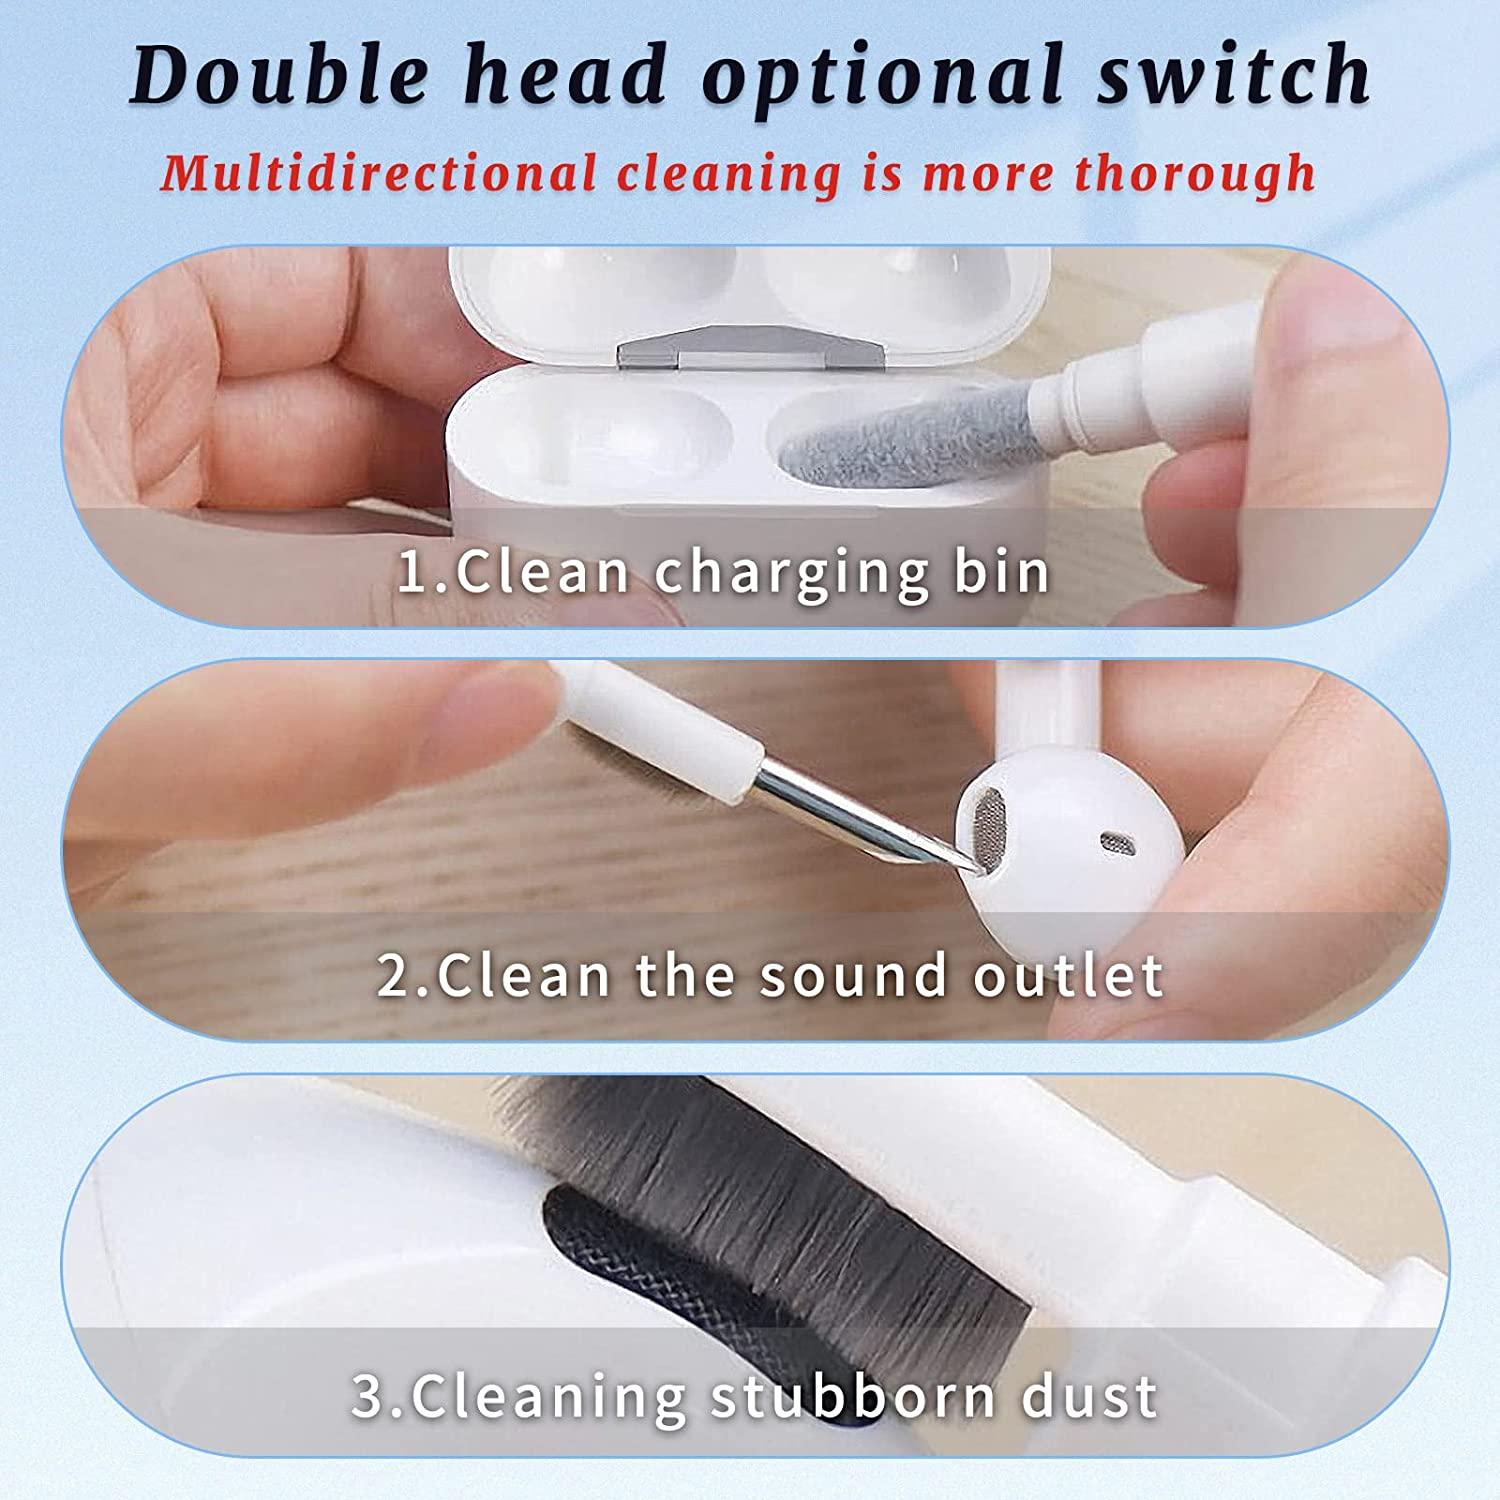 3 In 1 Multifunctional Cleaning Brush - Best Price in Singapore